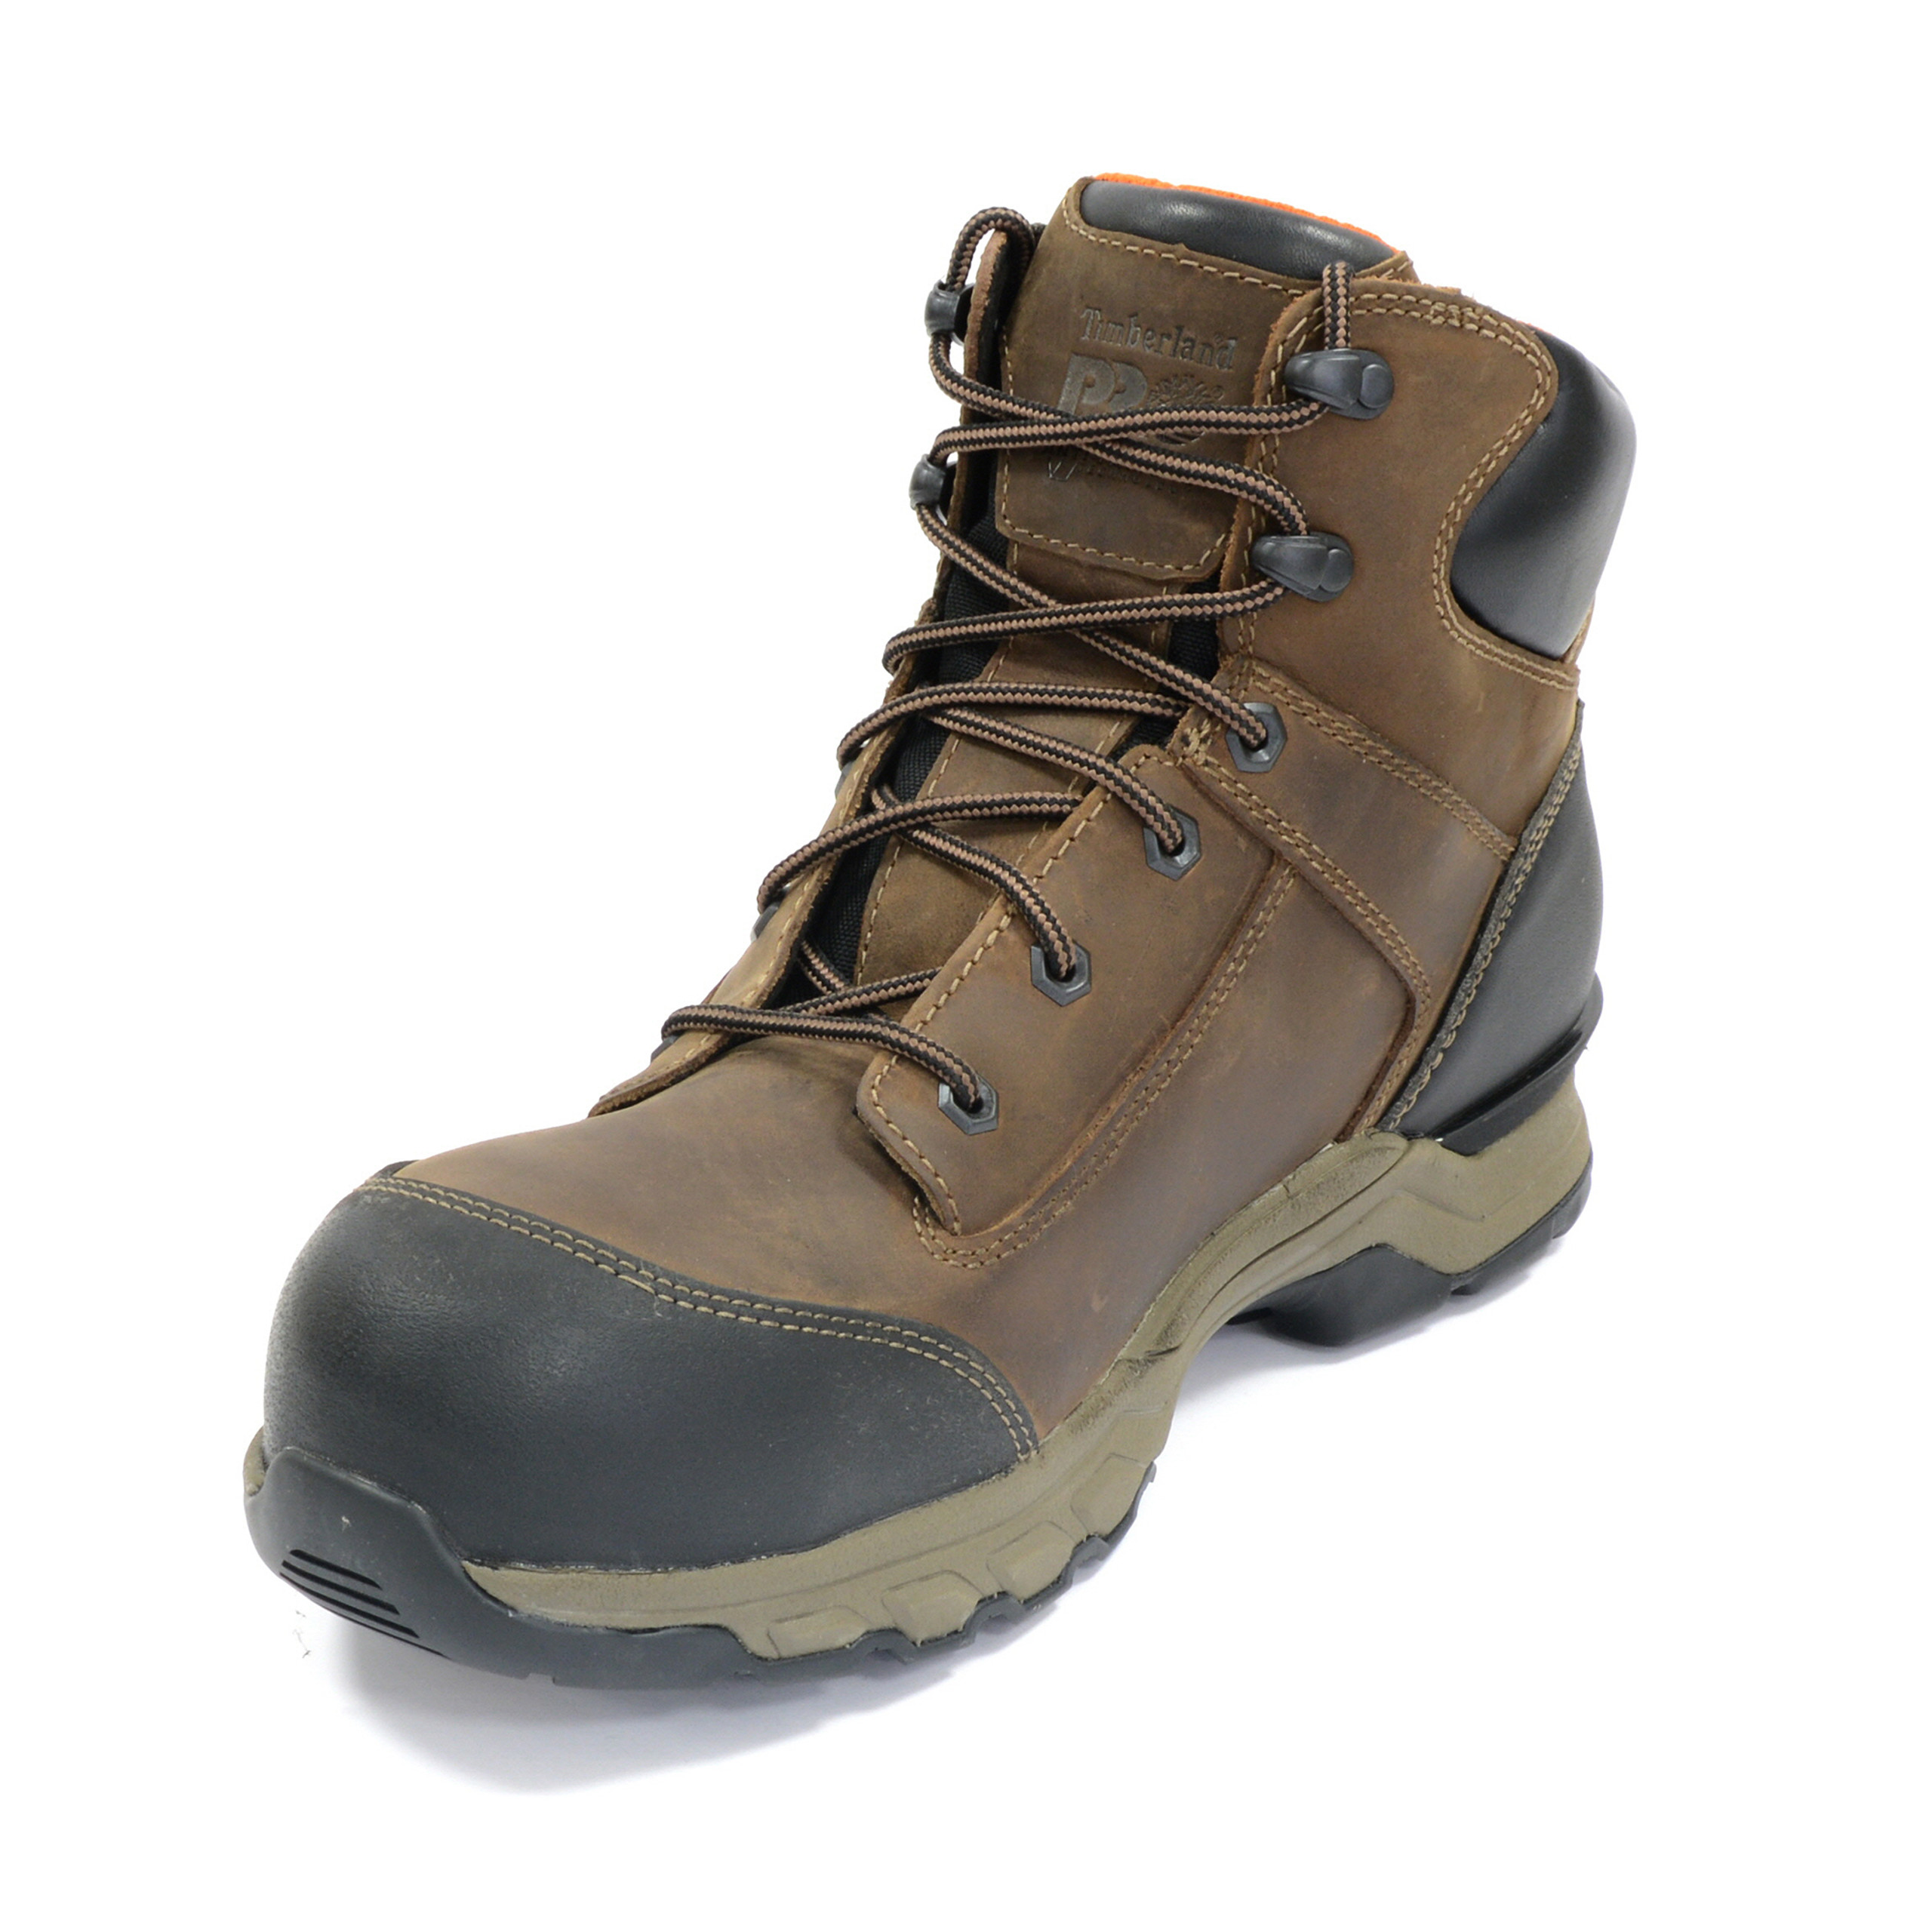 Timberland Pro Hypercharge Safety Boot - Brown | ITS.co.uk|